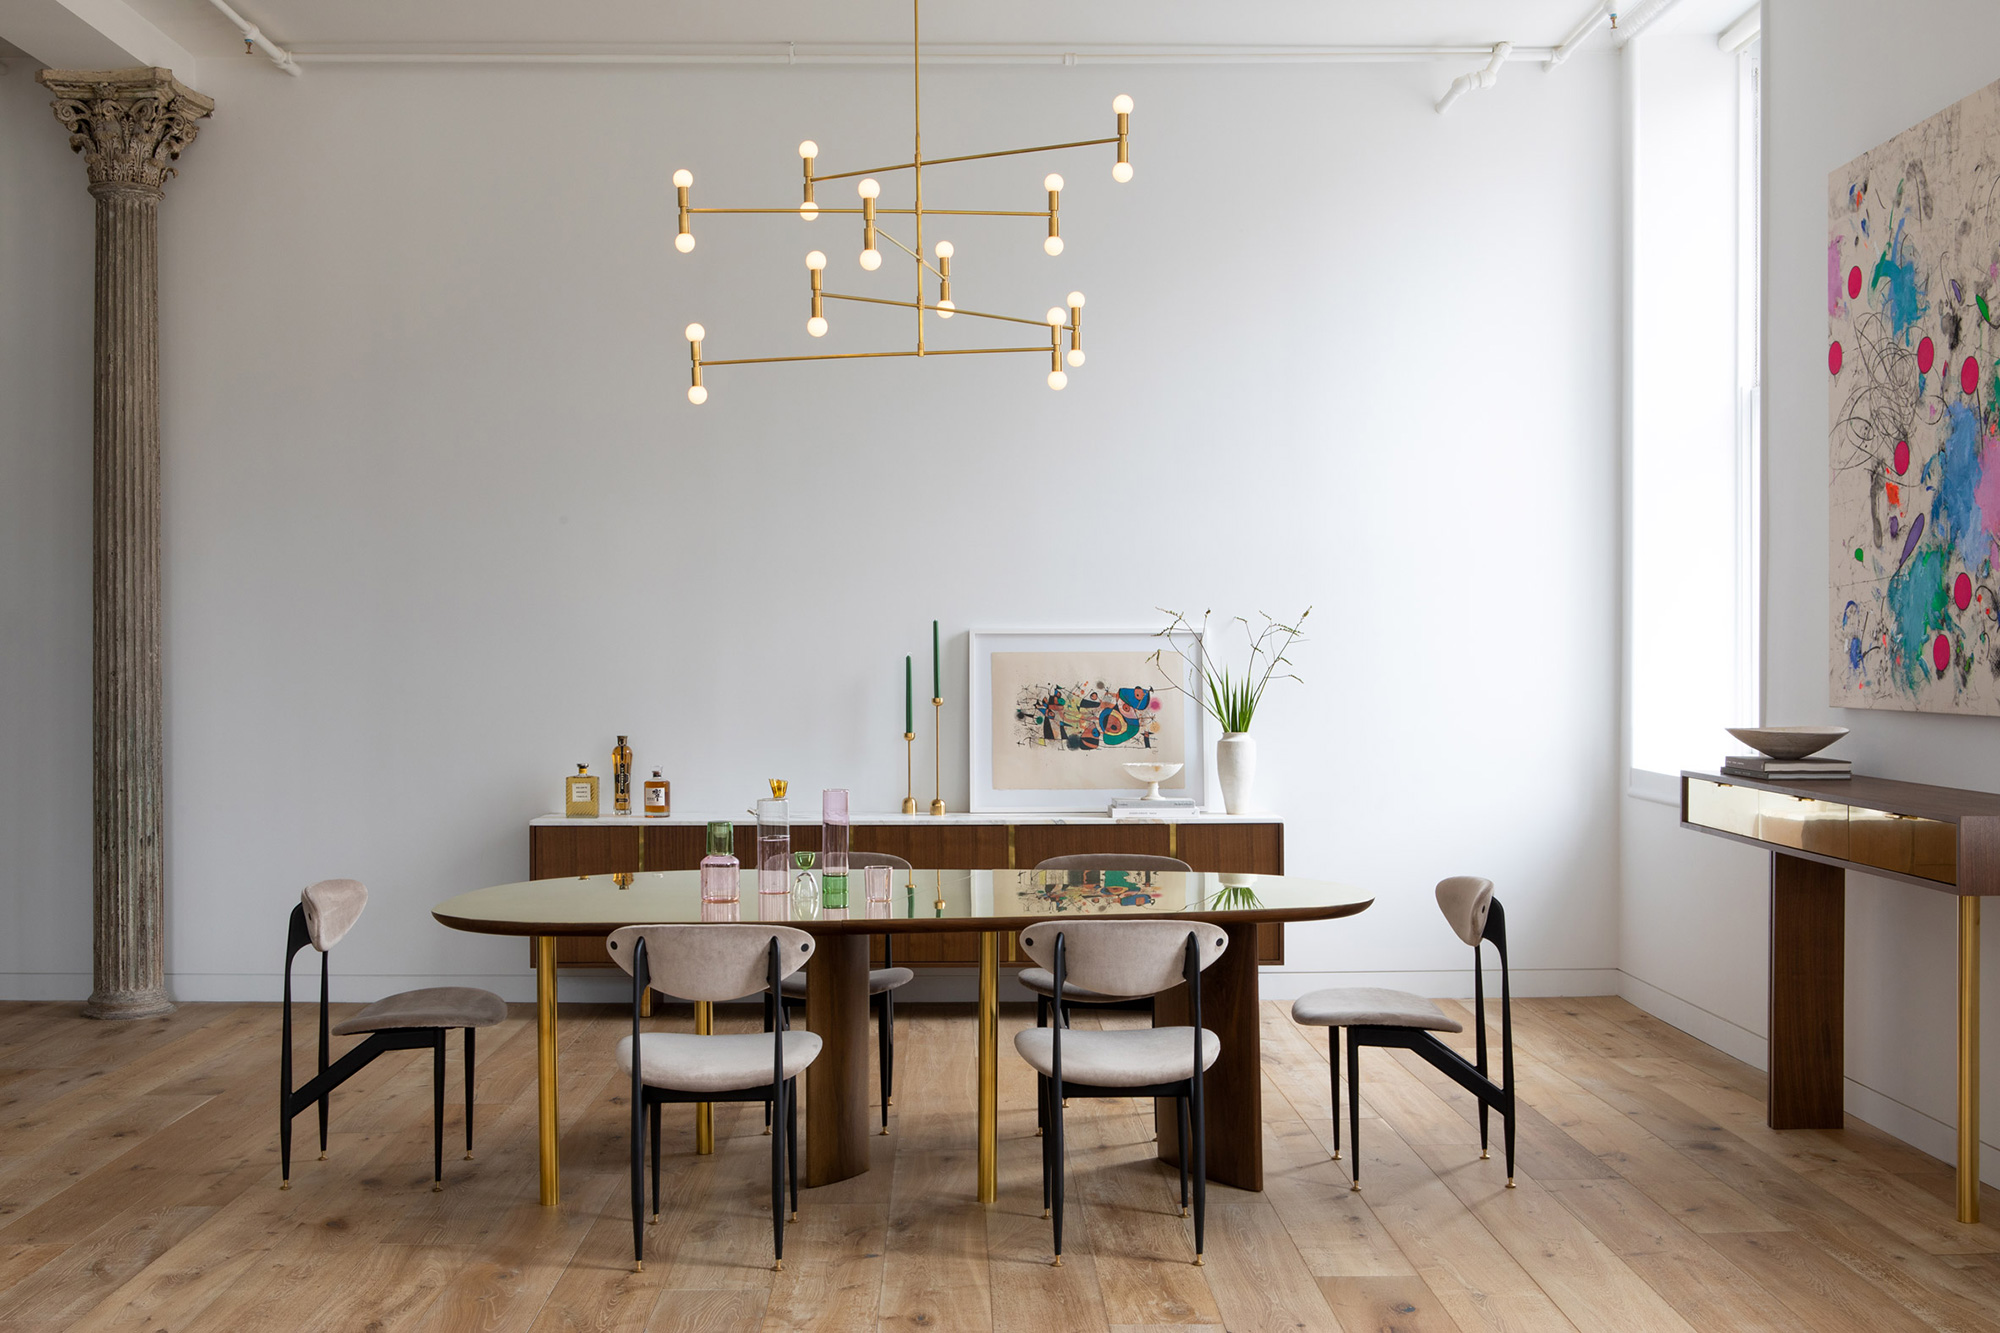 Tribeca loft by Andrea Leung architect, dining room